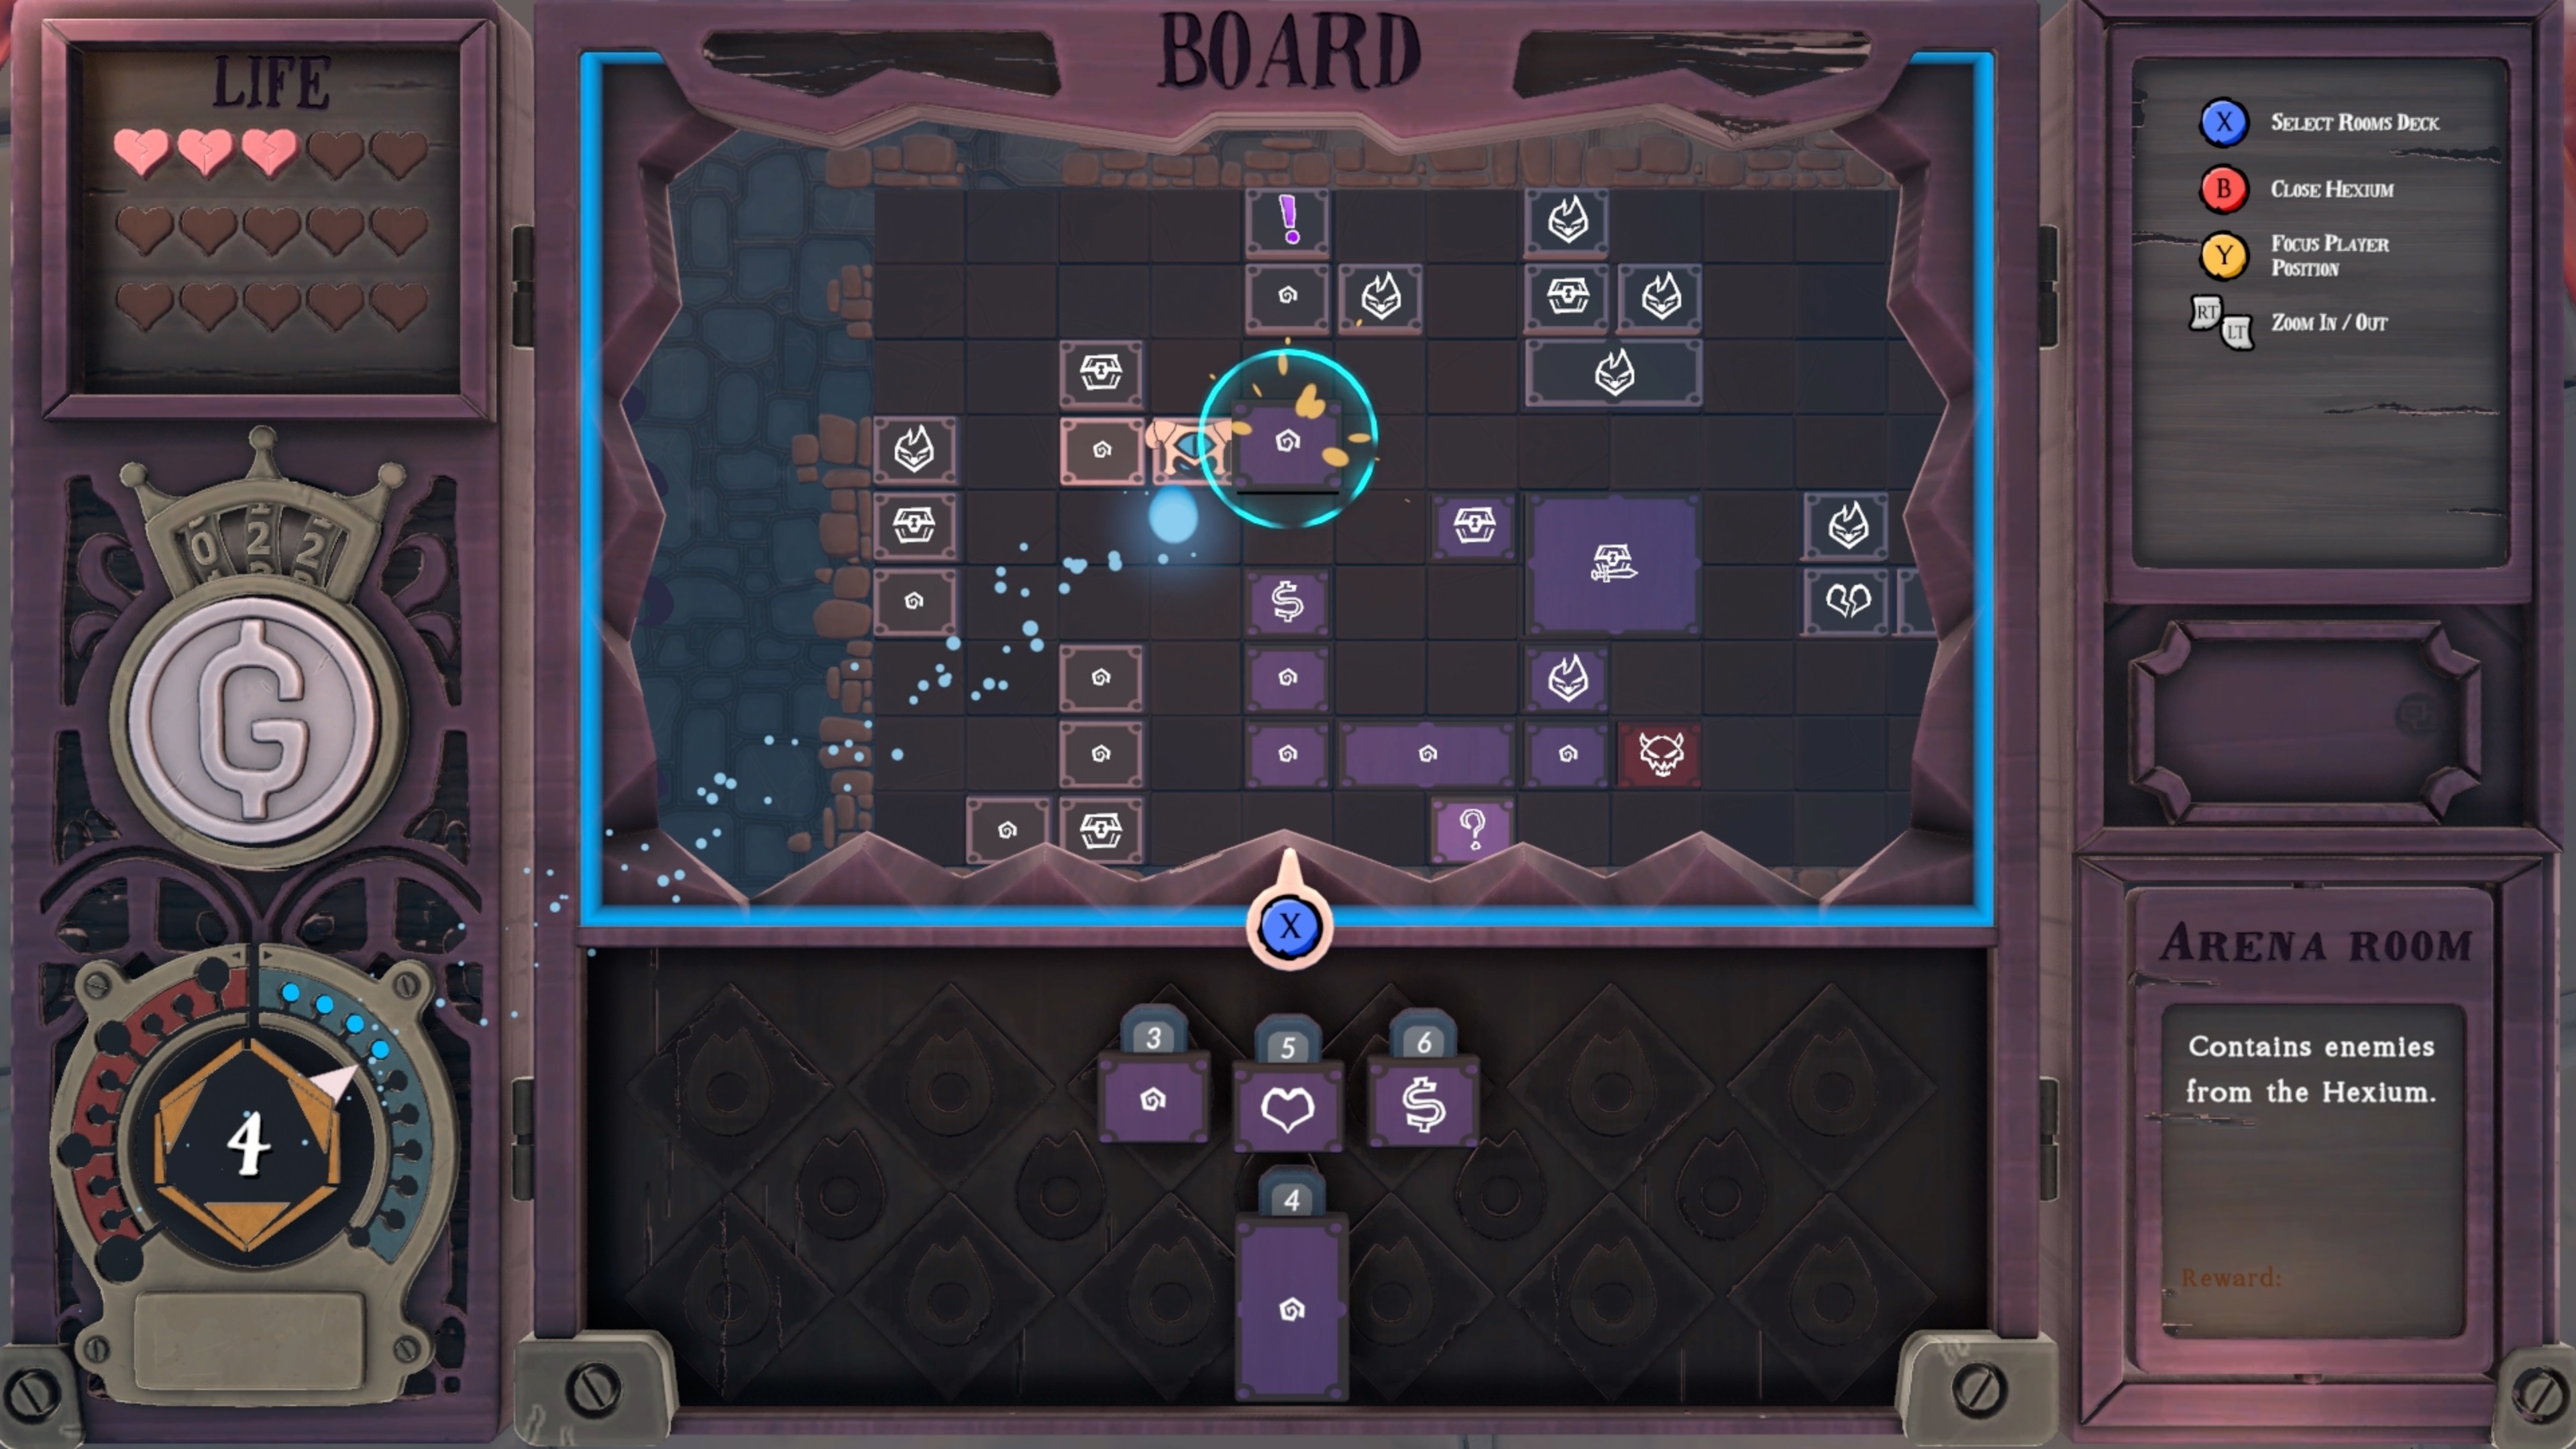 Cryptical Path - A grid board interface showing a path of constructed rooms